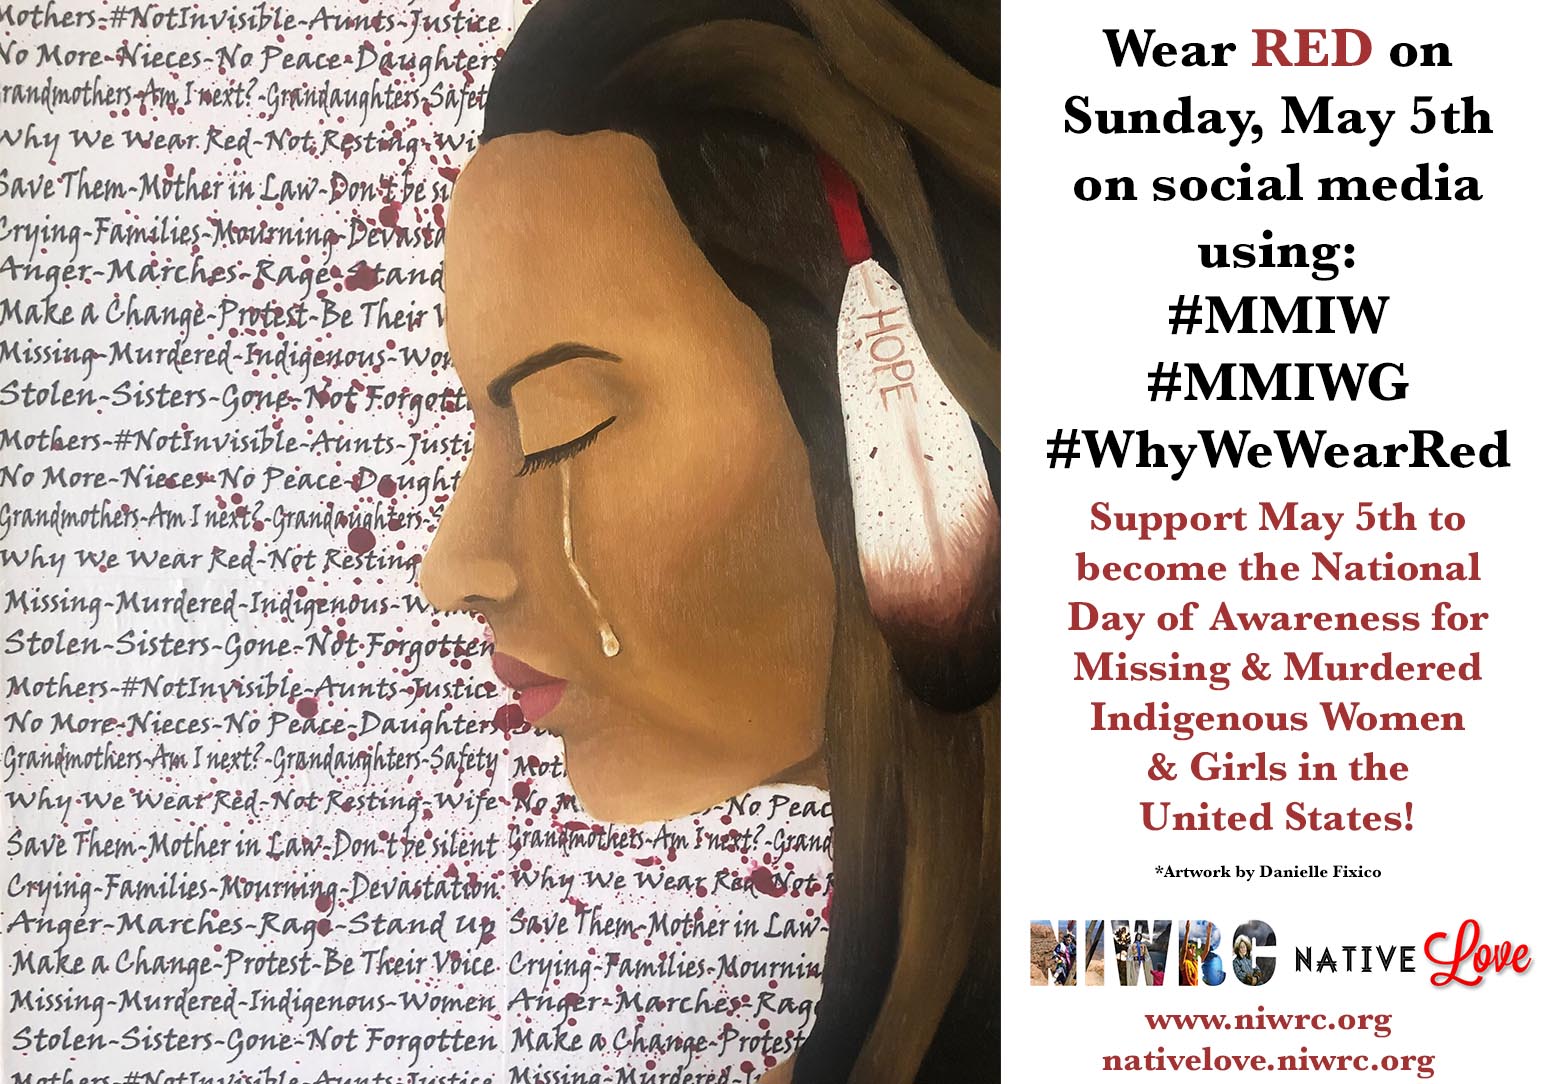 The National Indigenous Women’s Resource Center’s New Resources in Support of the National Day of Awareness for Missing and Murdered Indigenous Women